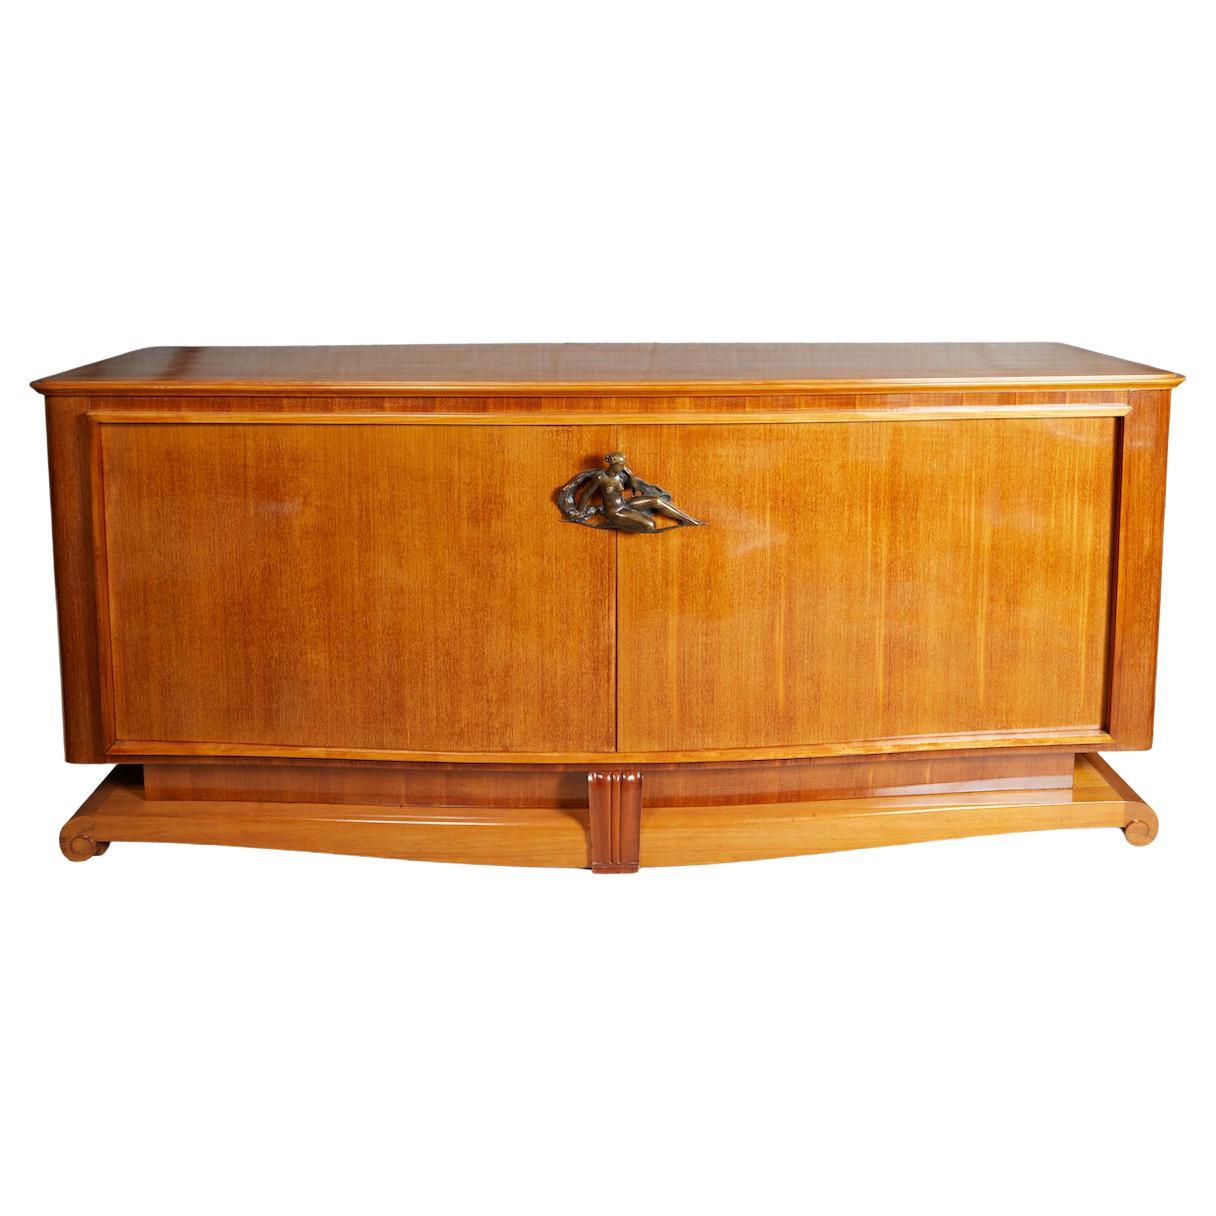 Fine French Art Deco Period Mahogany Buffet by André Arbus and Vadim Androussov For Sale